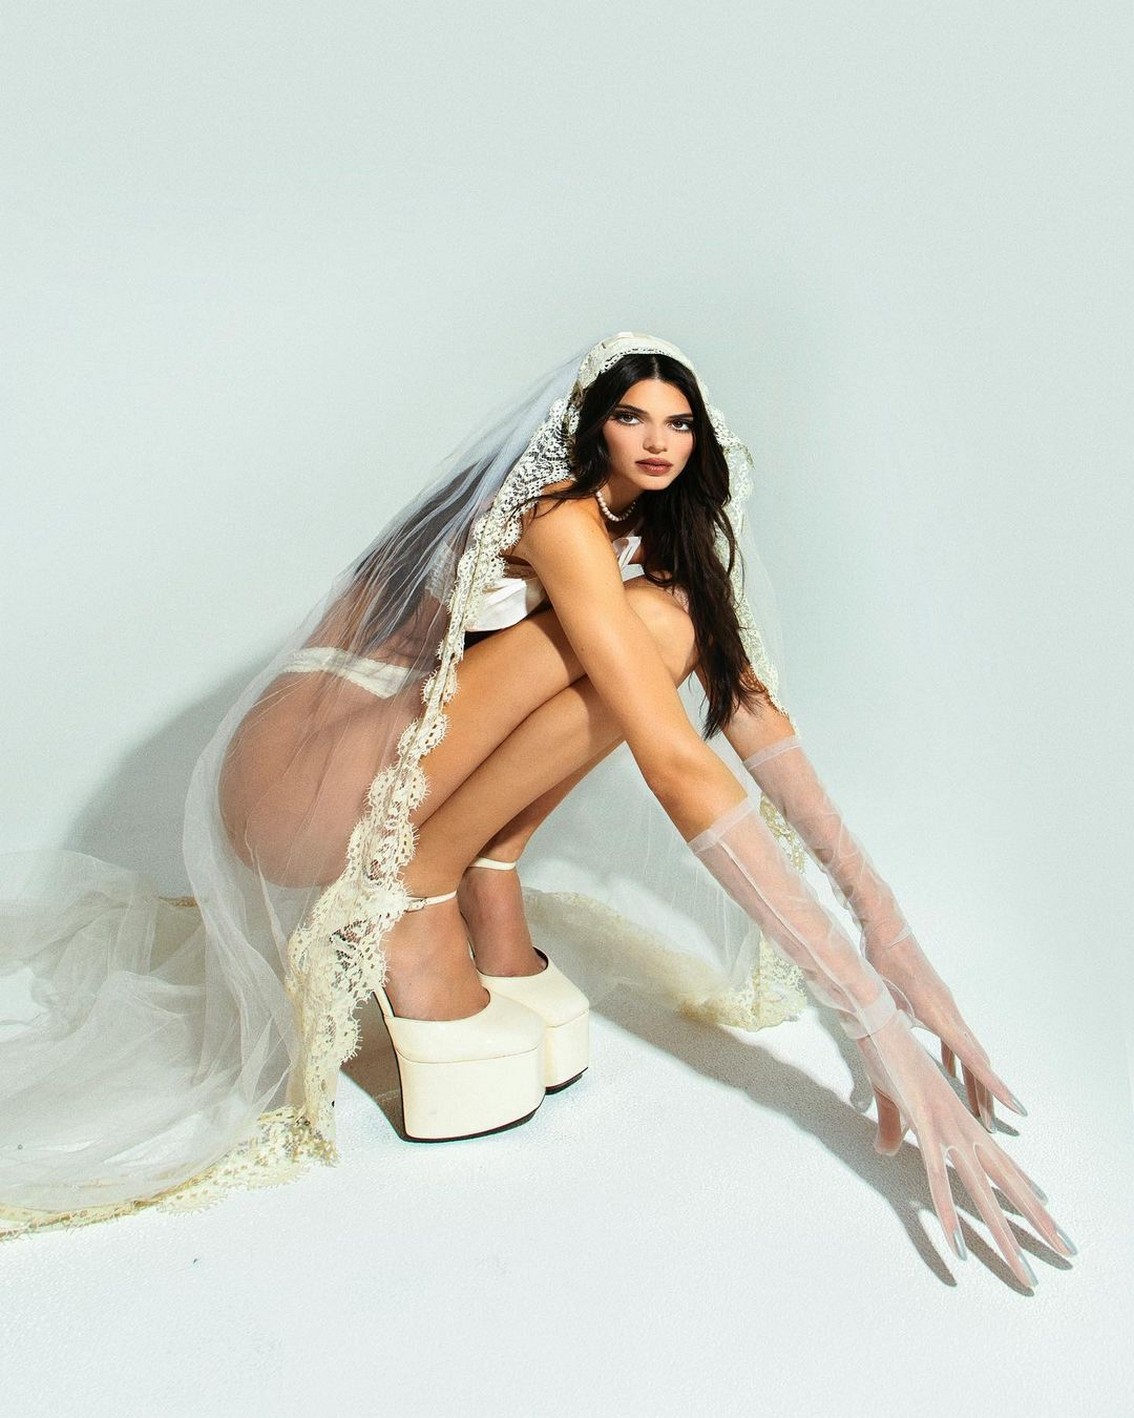 Kendall Jenner Sexy Corpse Bride TheFappening.Pro 2 - Kendall Jenner Sexy For Halloween 2021 (5 Photos)